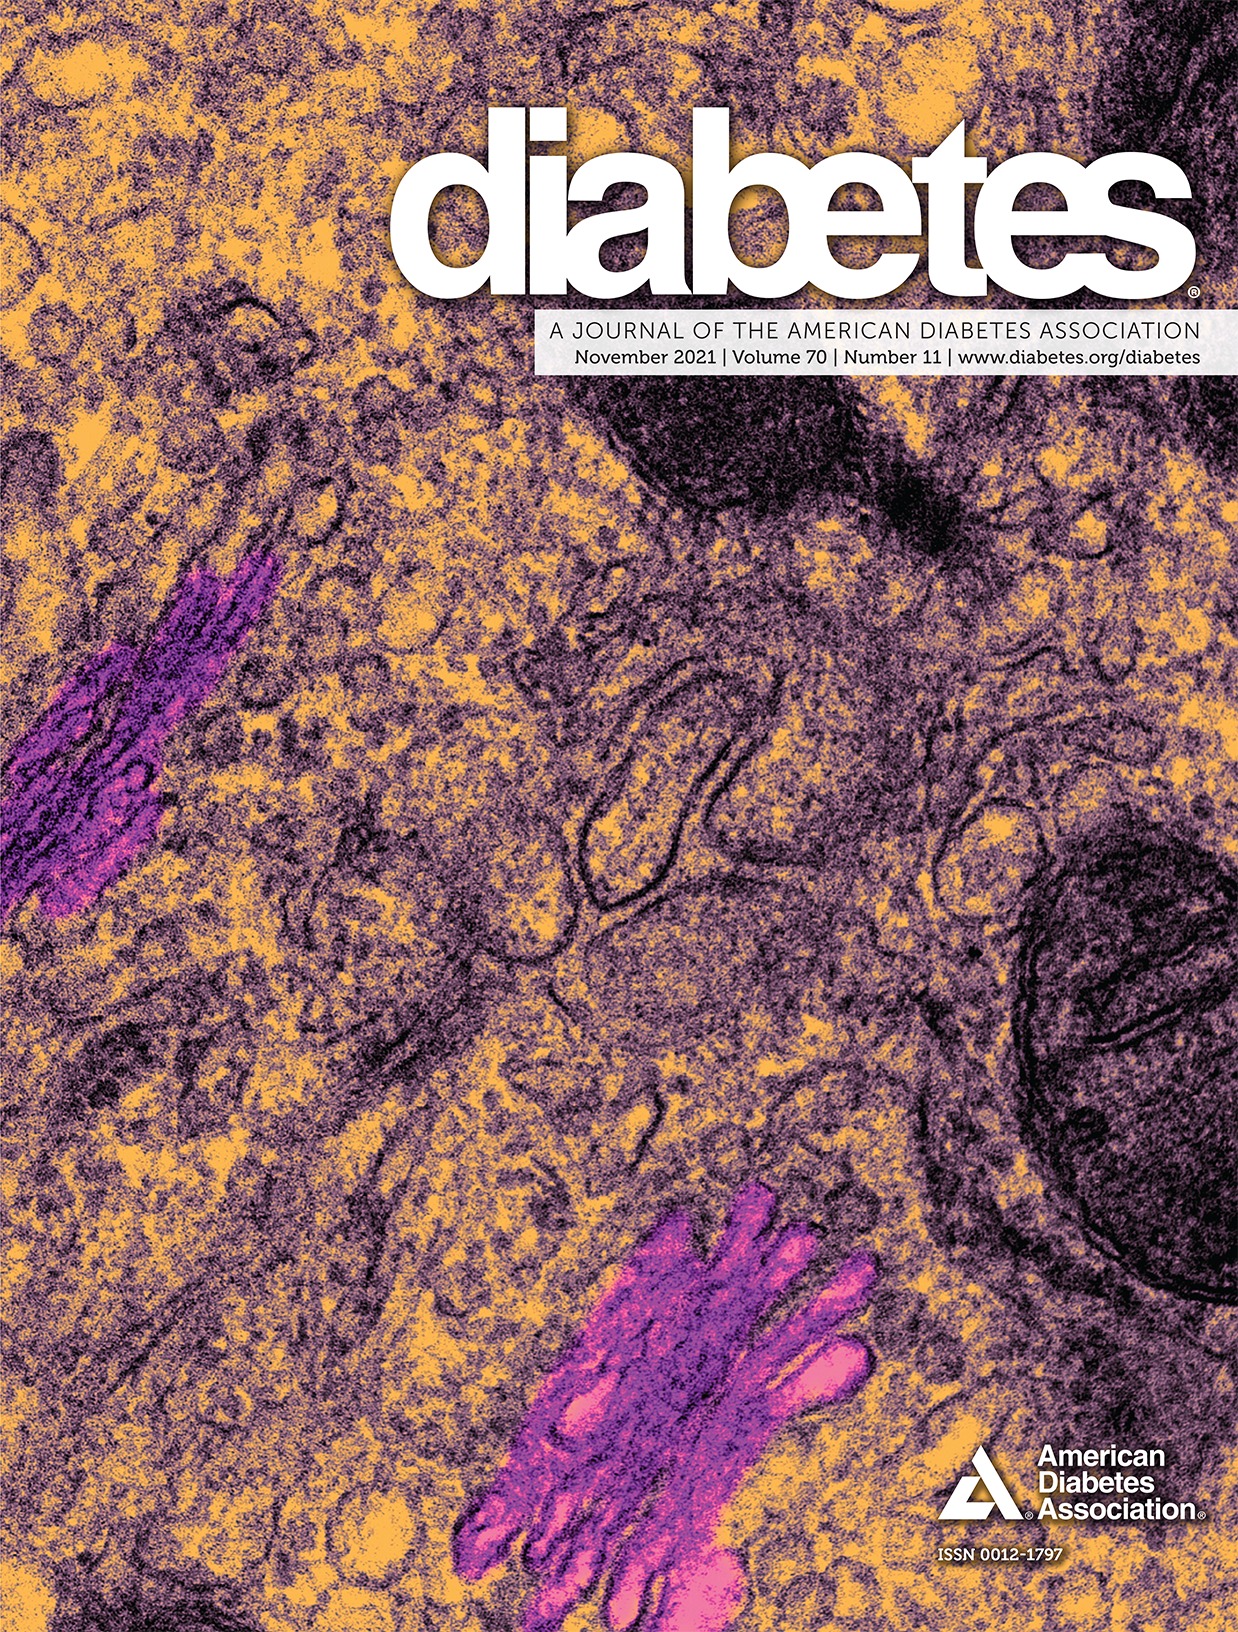 Leukocyte Counts and T-Cell Frequencies Differ Between Novel Subgroups of Diabetes and Are Associated With Metabolic Parameters and Biomarkers of Inflammation